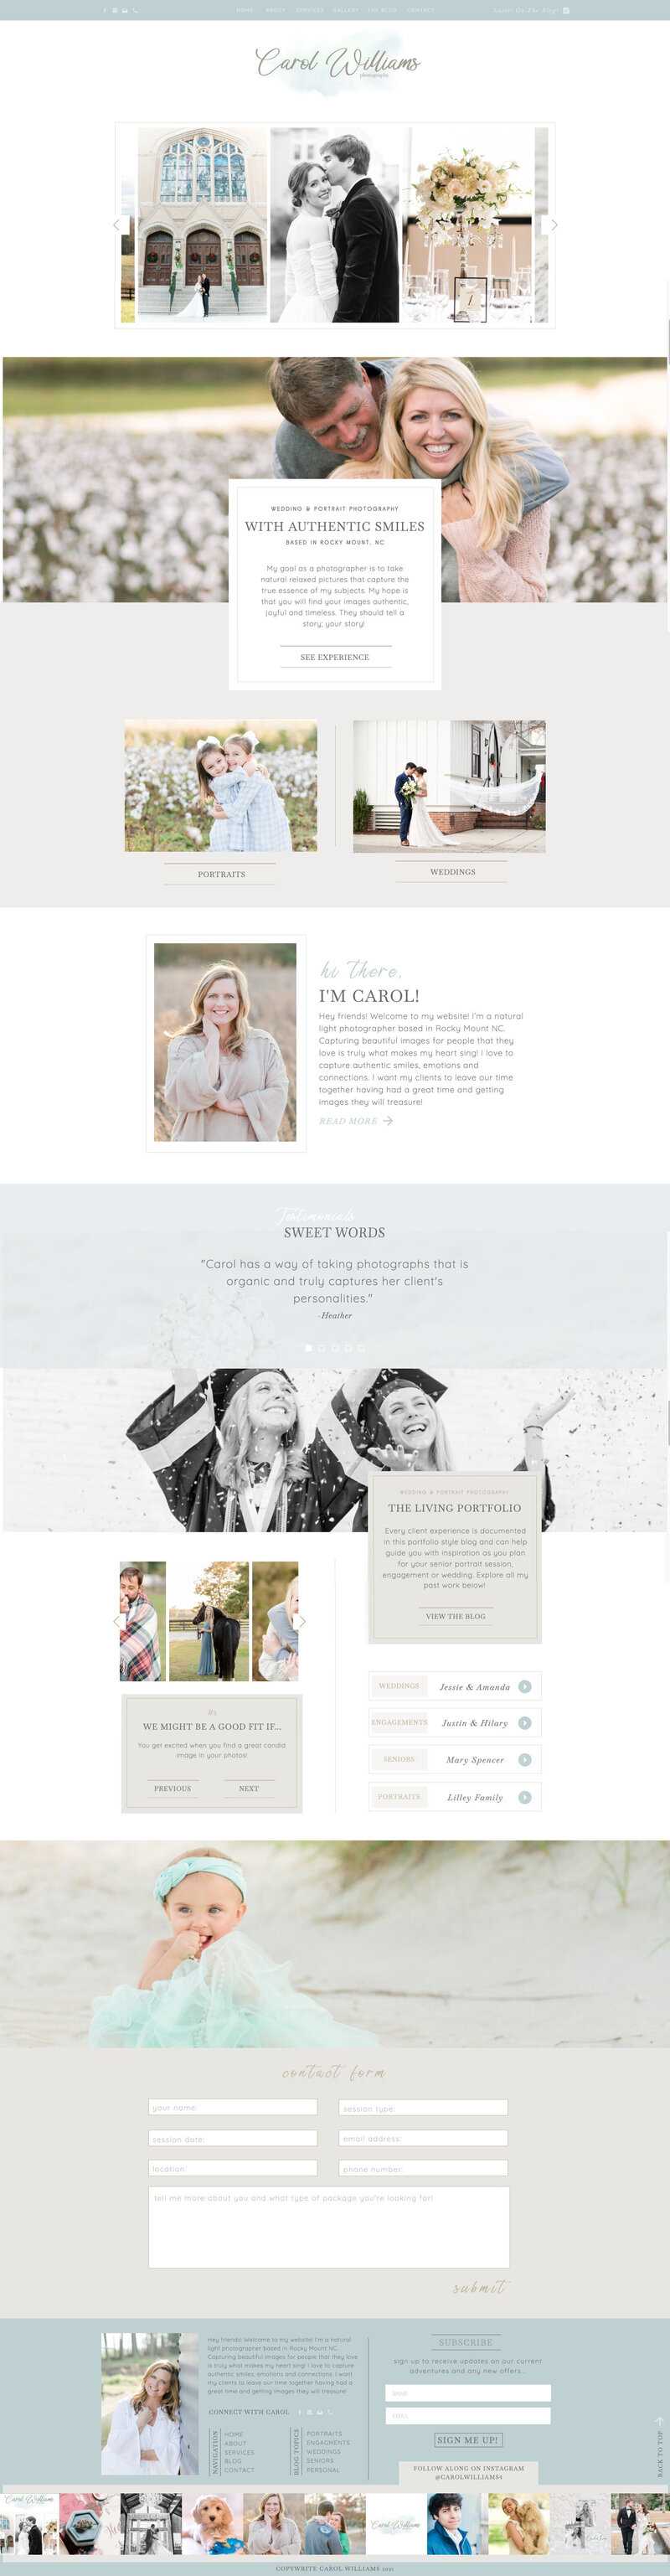 Carol Williams Photography Home Page